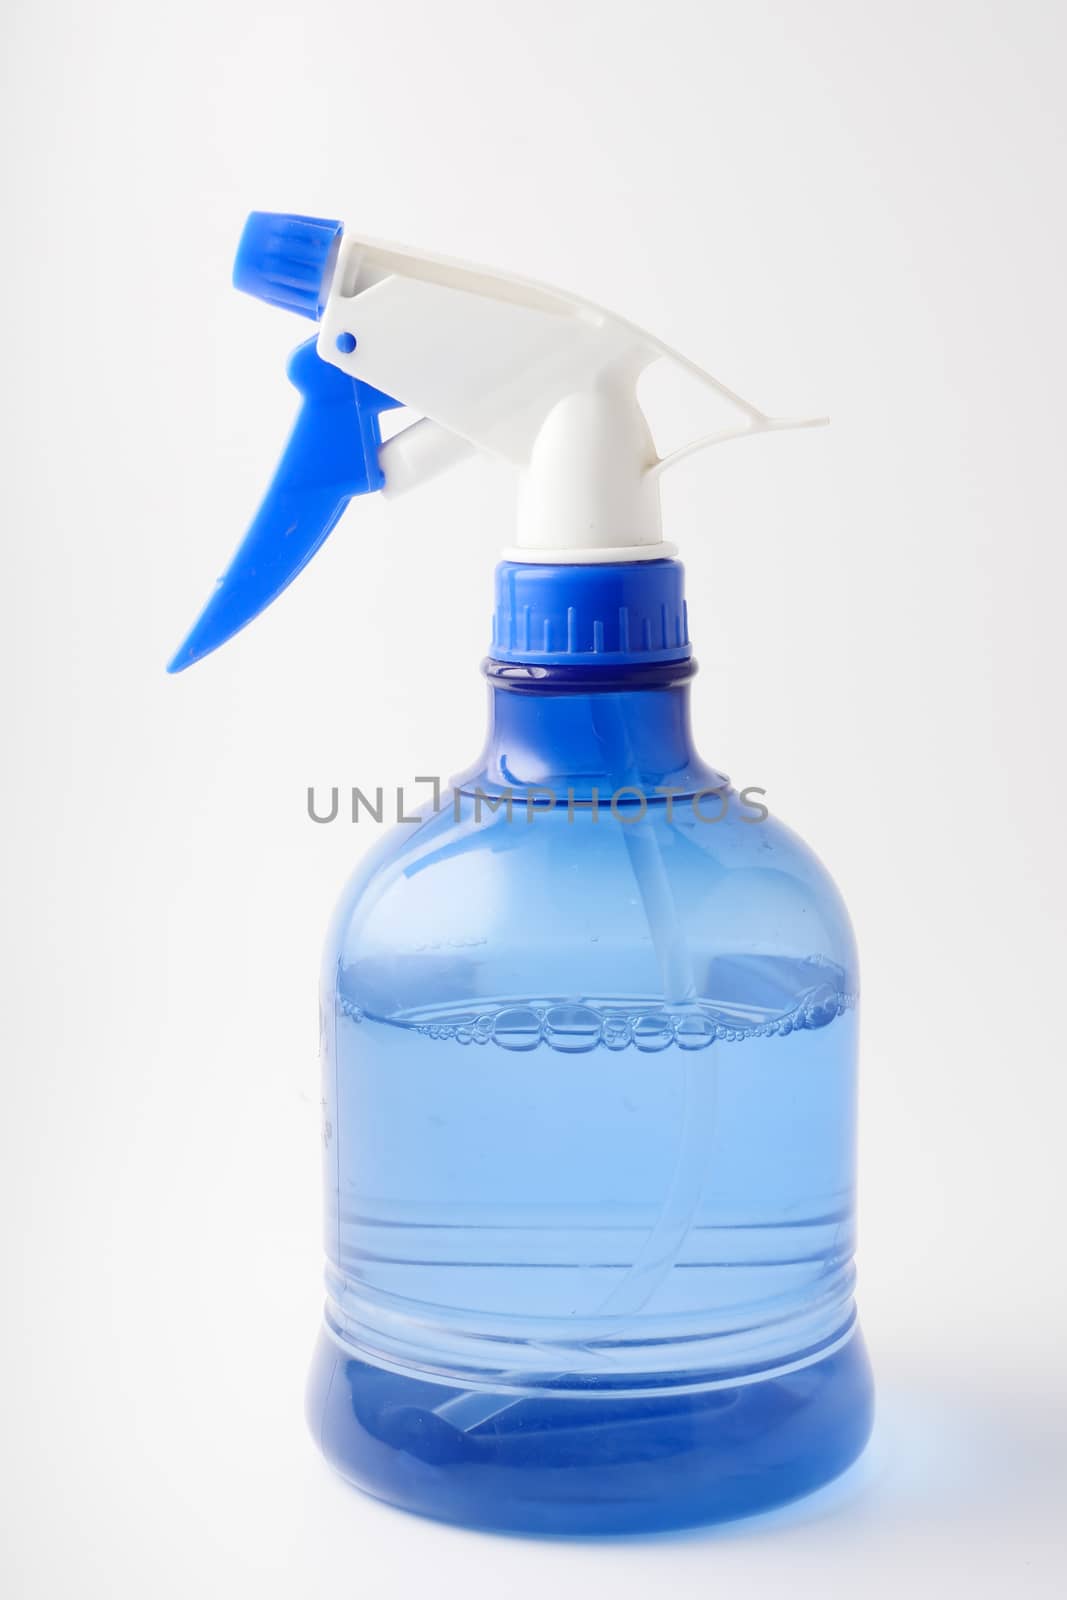 Spray bottle on a white background. Splashing water. by ronnarong